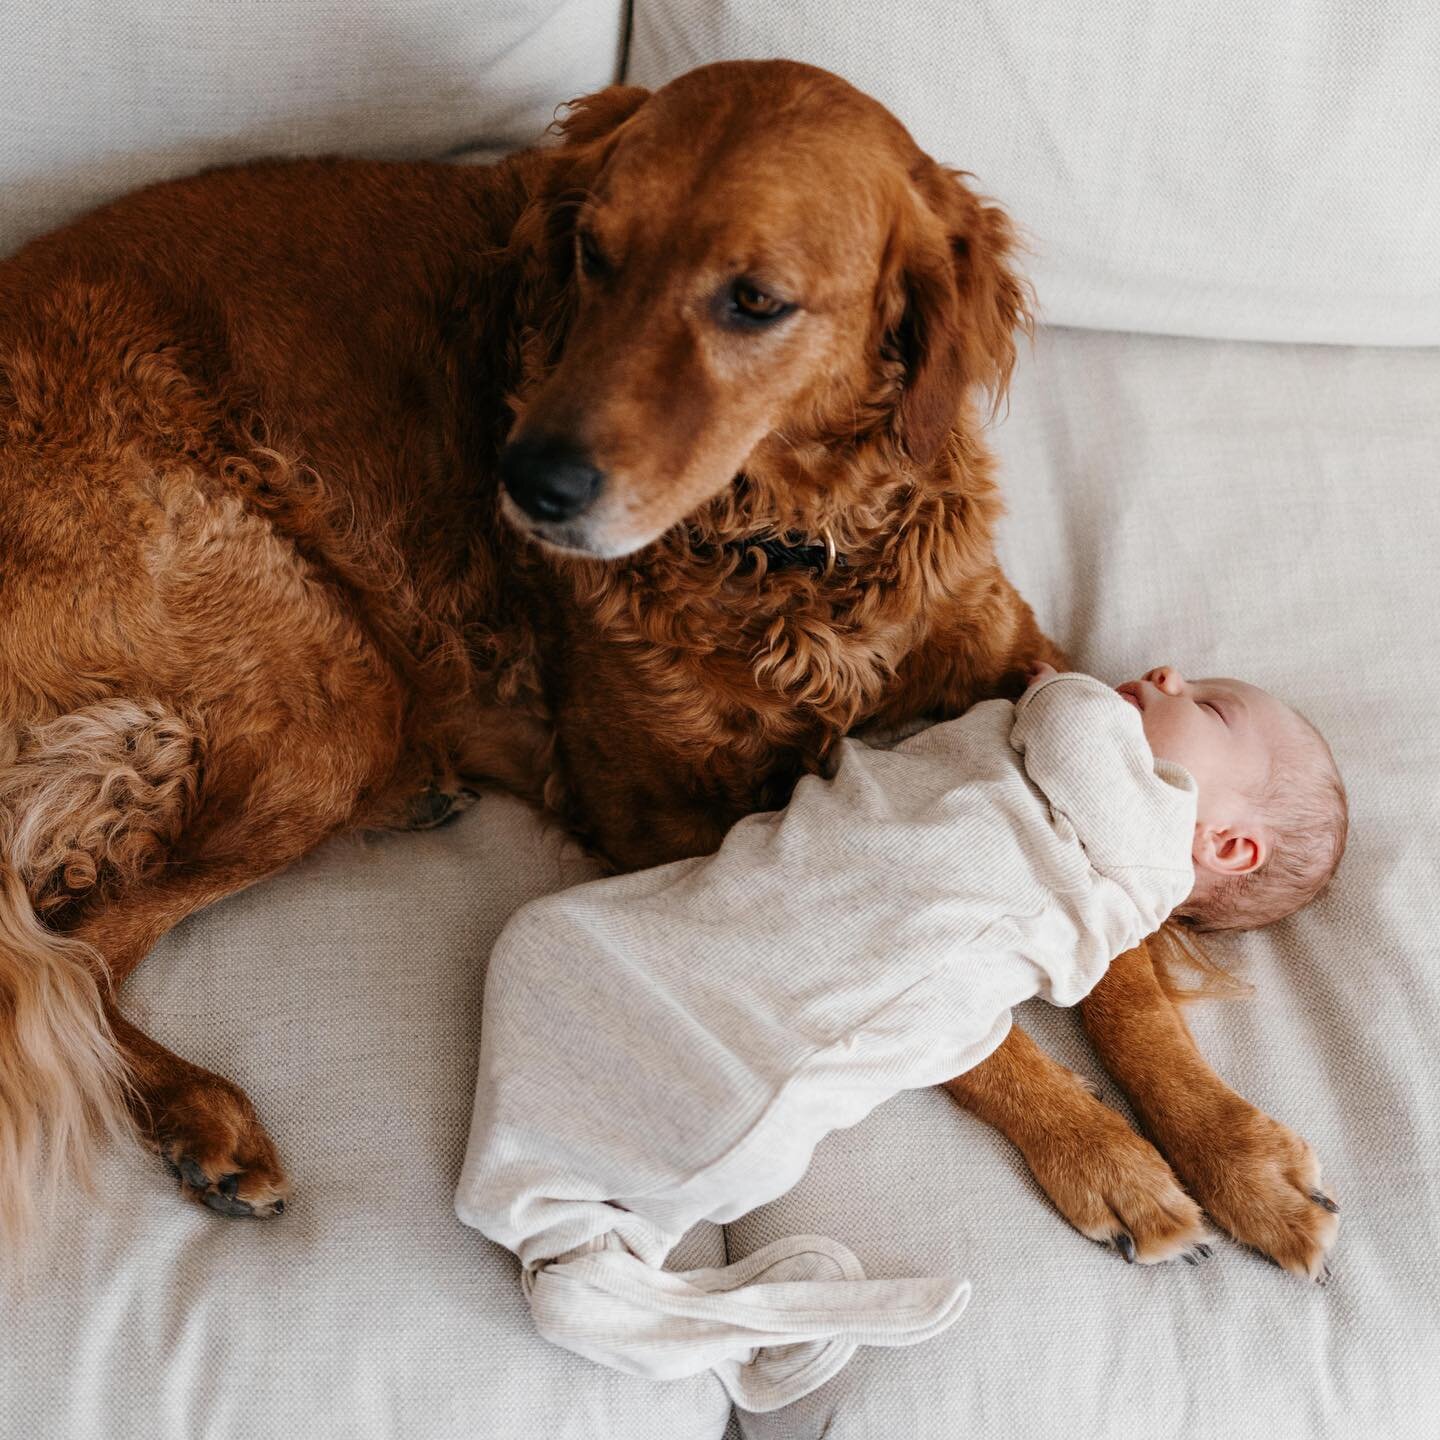 We love to watch our families grow! I&rsquo;ve captured their engagement, wedding, maternity and my awesome associate Nora captured their newborn session 😍
.
Nellie the dog seems to like her new brother, am I right? 🥲